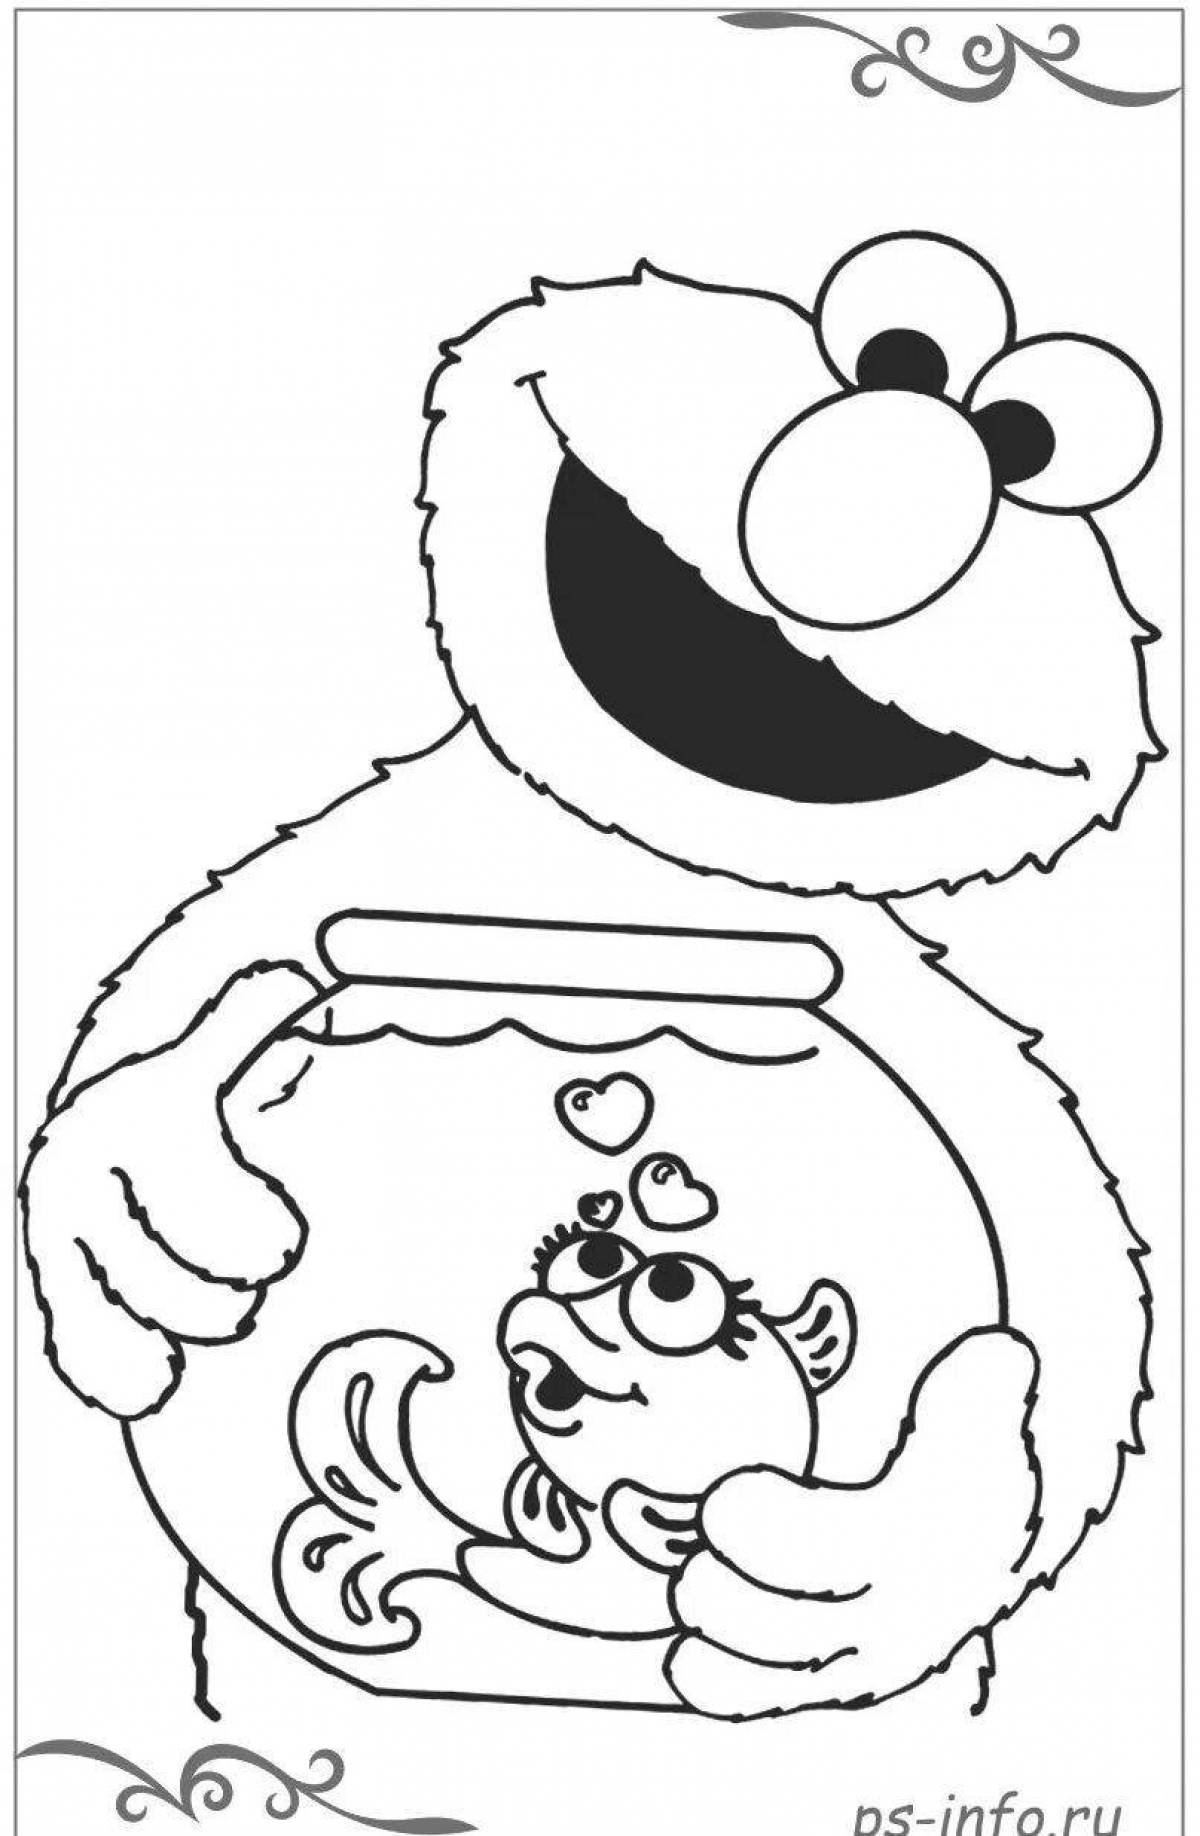 Sesame Street coloring page